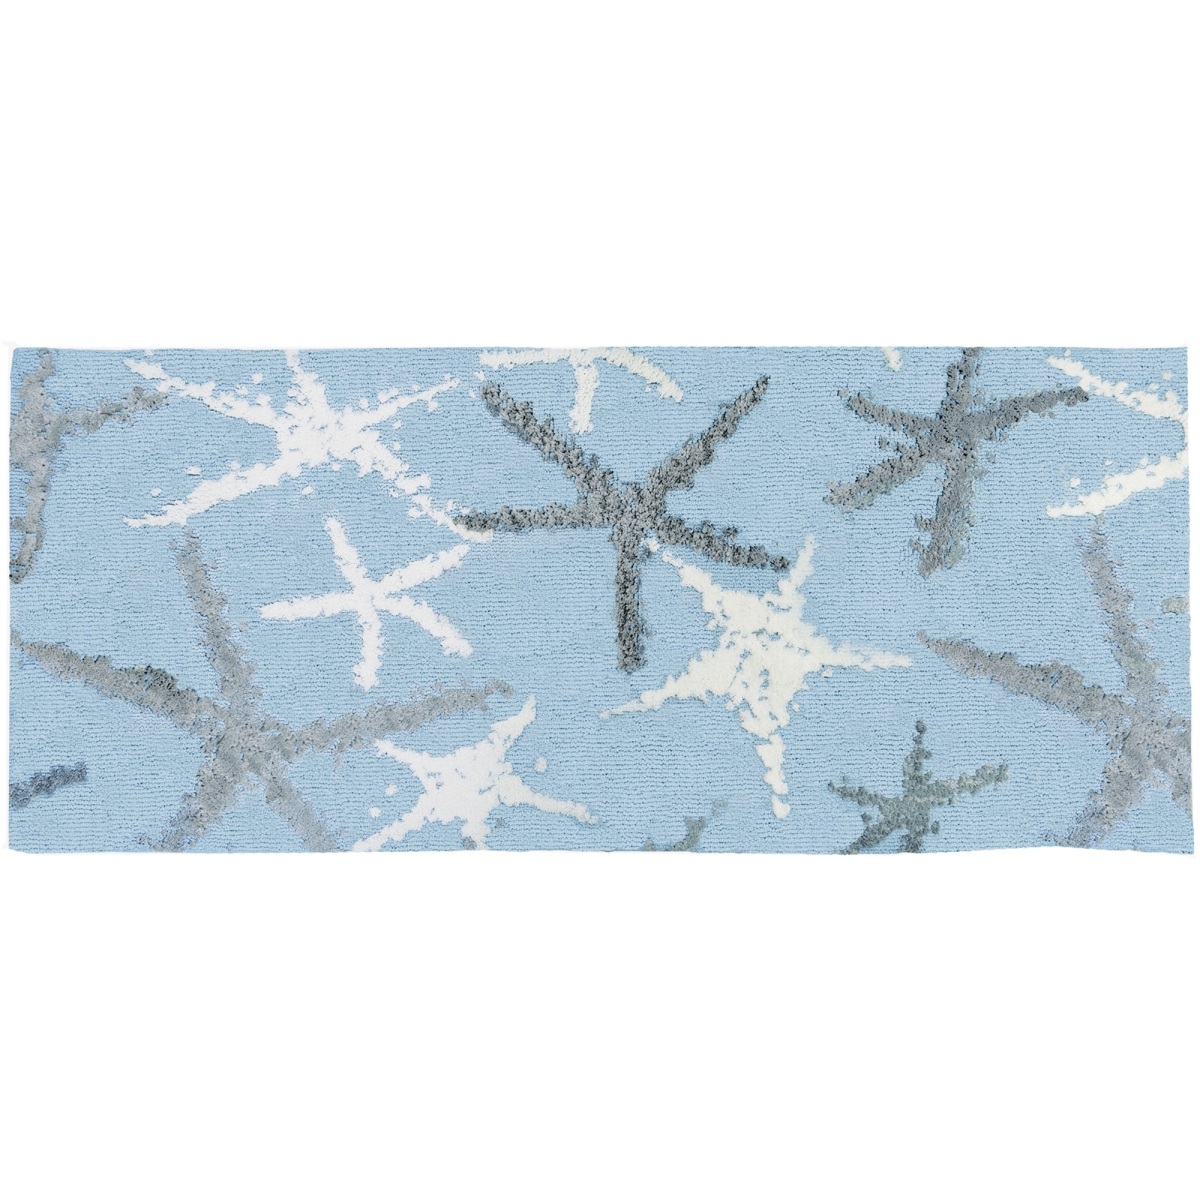 Pmf-kr001j 60 X 26 X 0.5 In. Tranquil Seas Indoor Area Rug, Multi Color